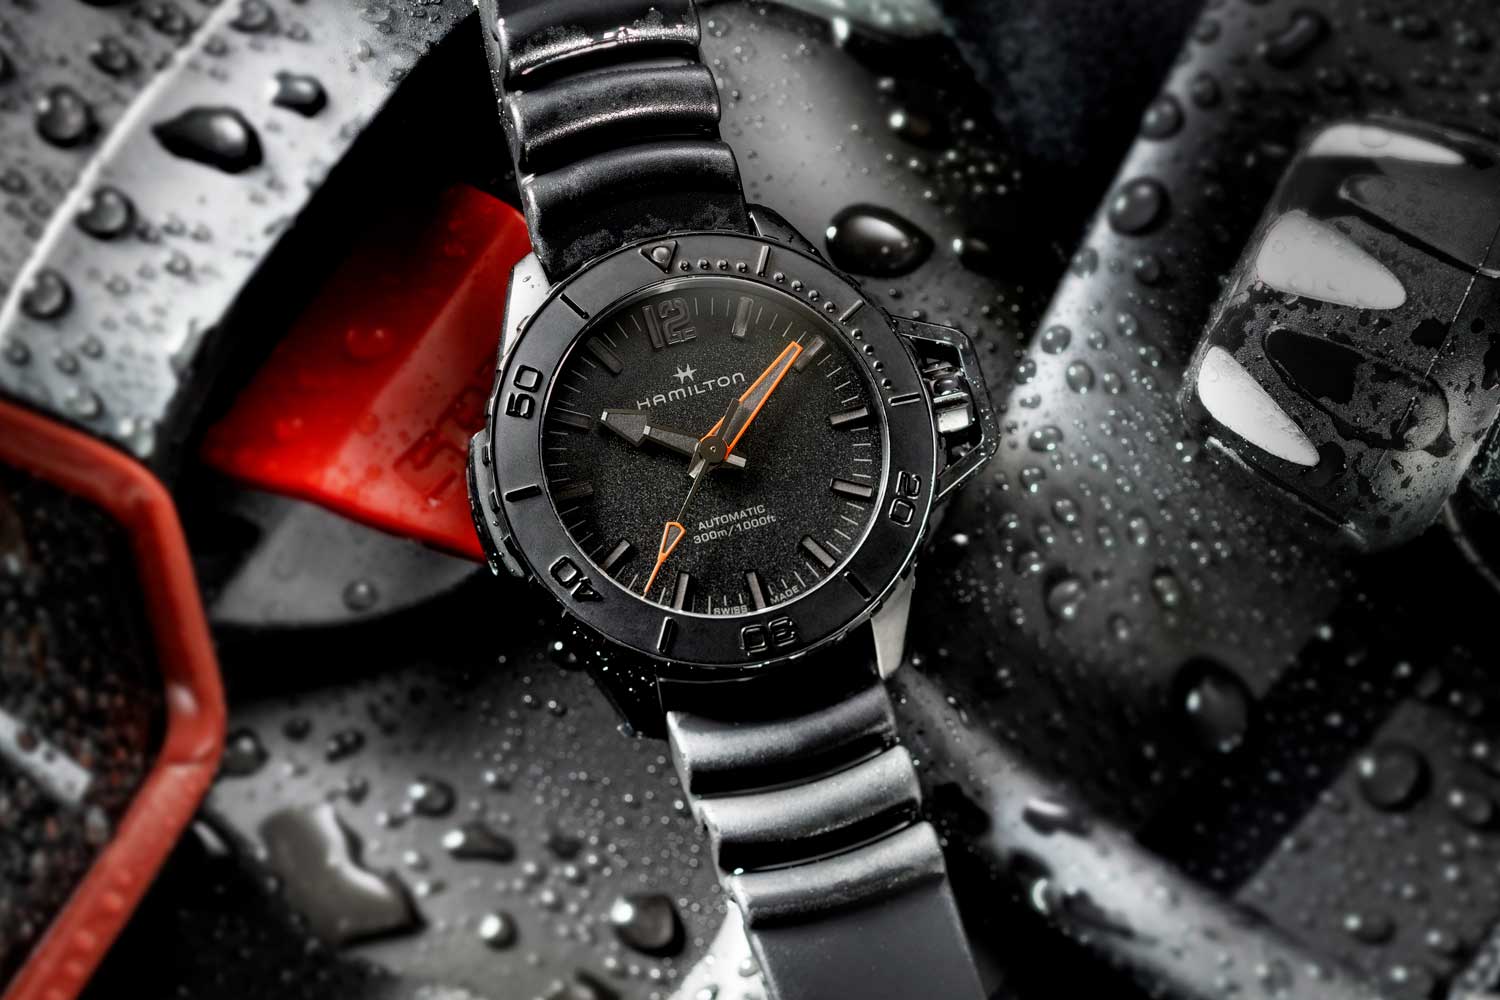 The black PVD version with dark grey bezel, black rubber strap and low-visibility markings